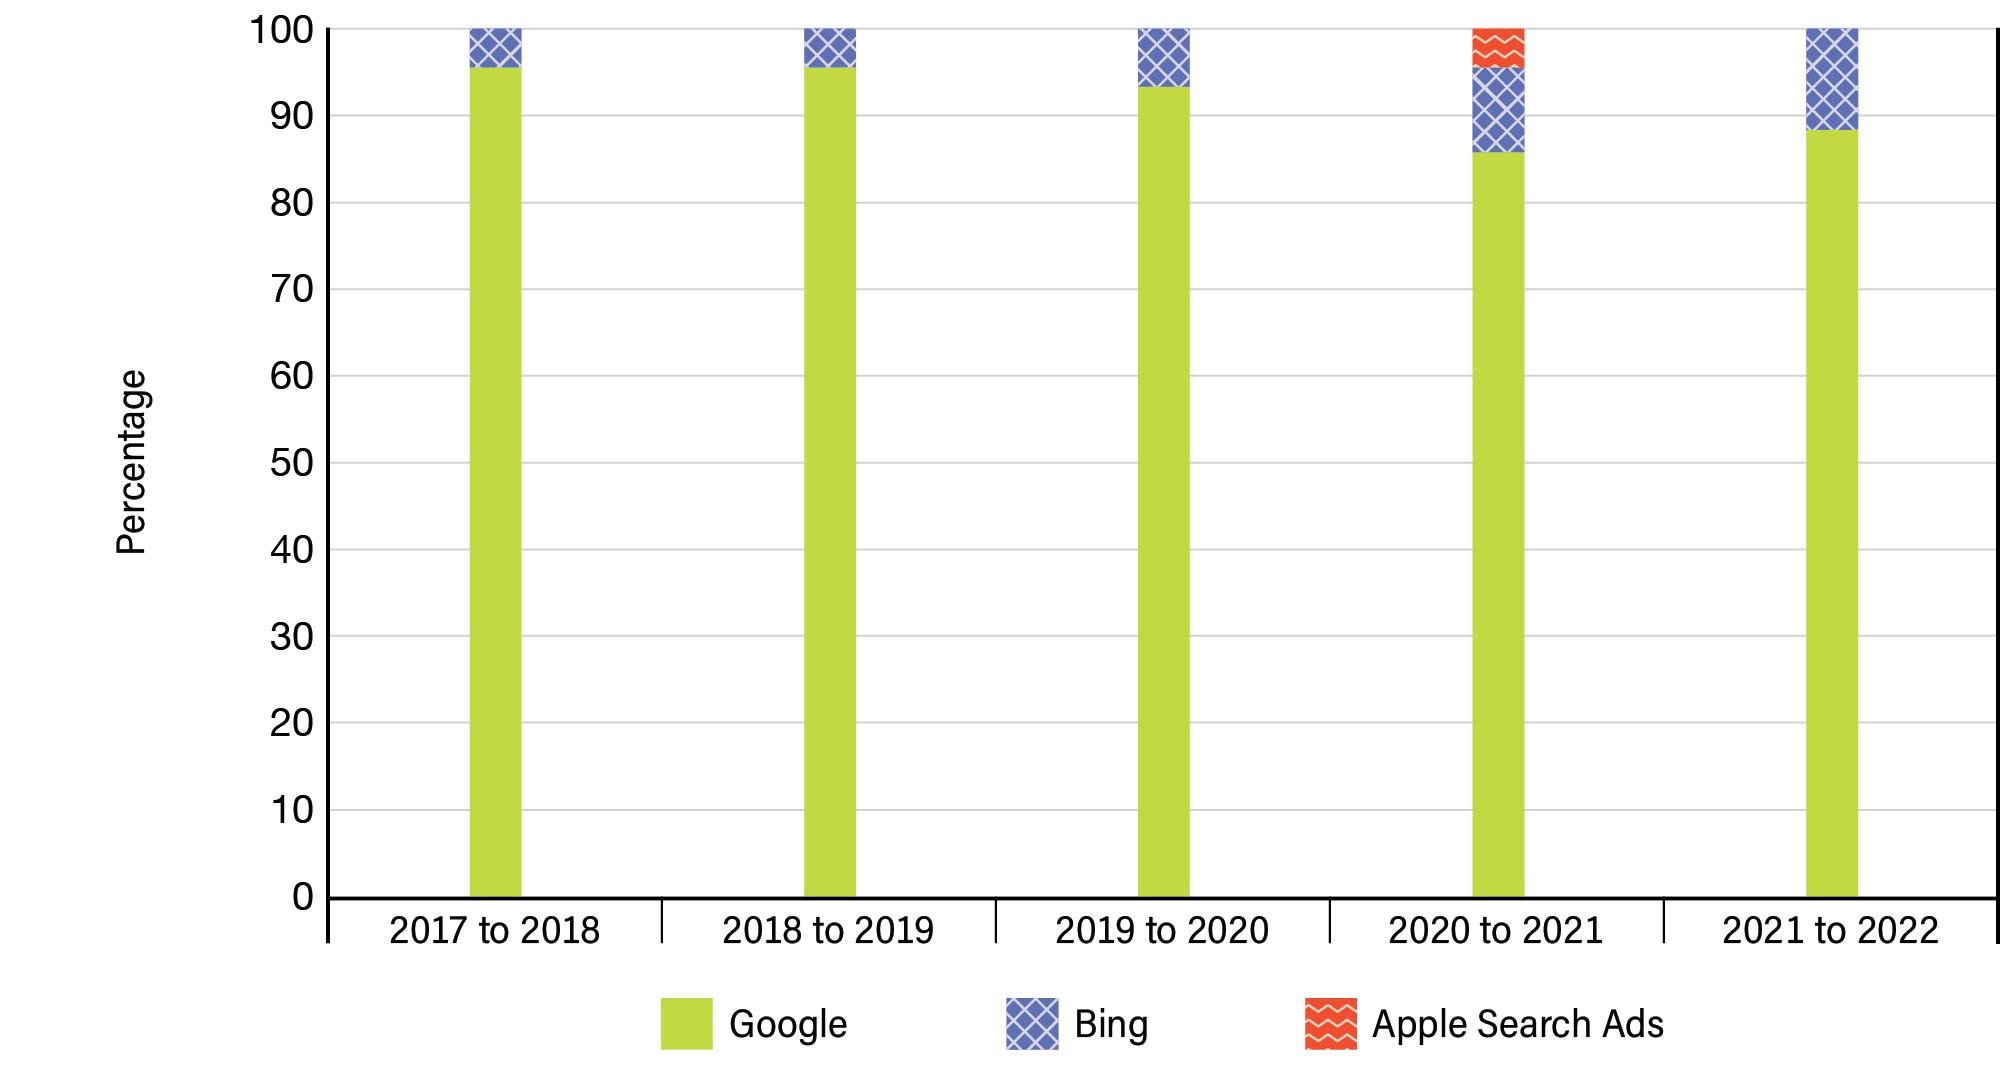 Figure 12: Distribution of search engine marketing media expenditures over 5 years - See image description below.